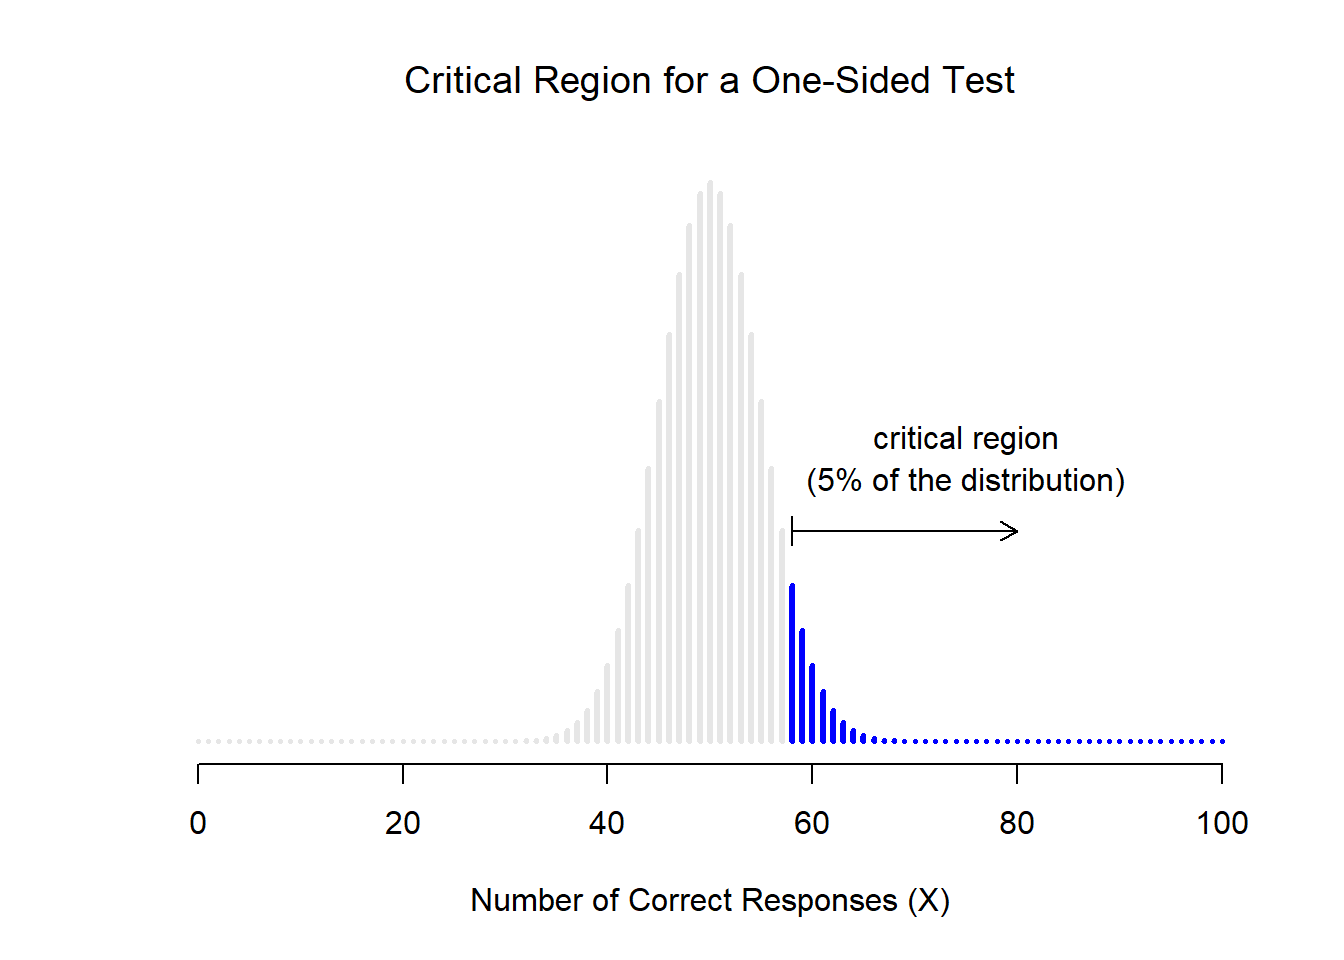 example of hypothesis in r